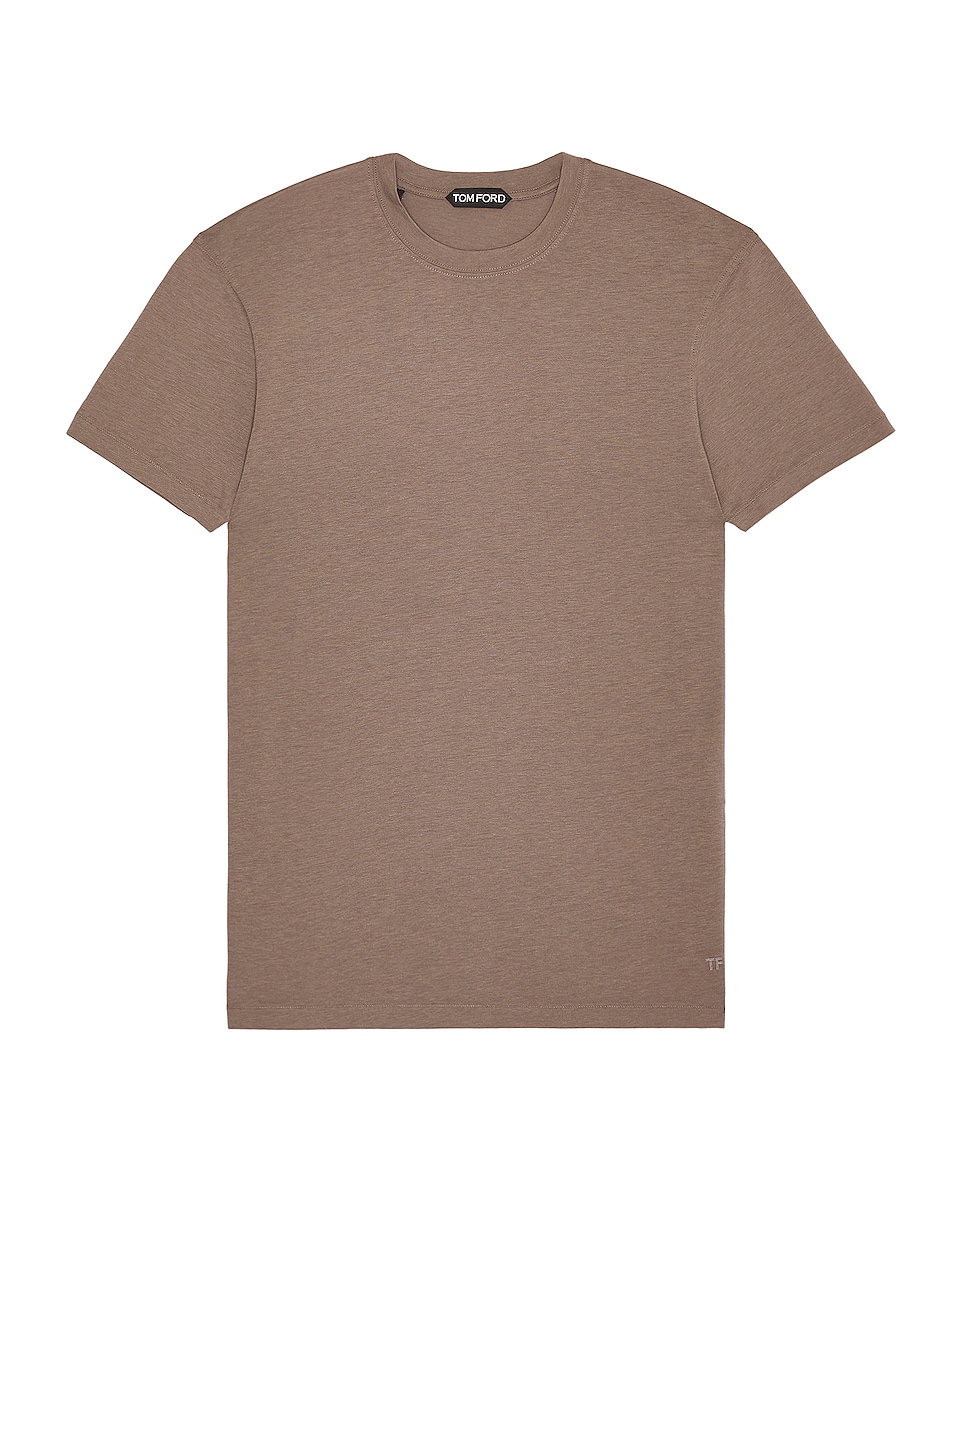 Image 1 of TOM FORD Viscose Cotton T-Shirt in Taupe